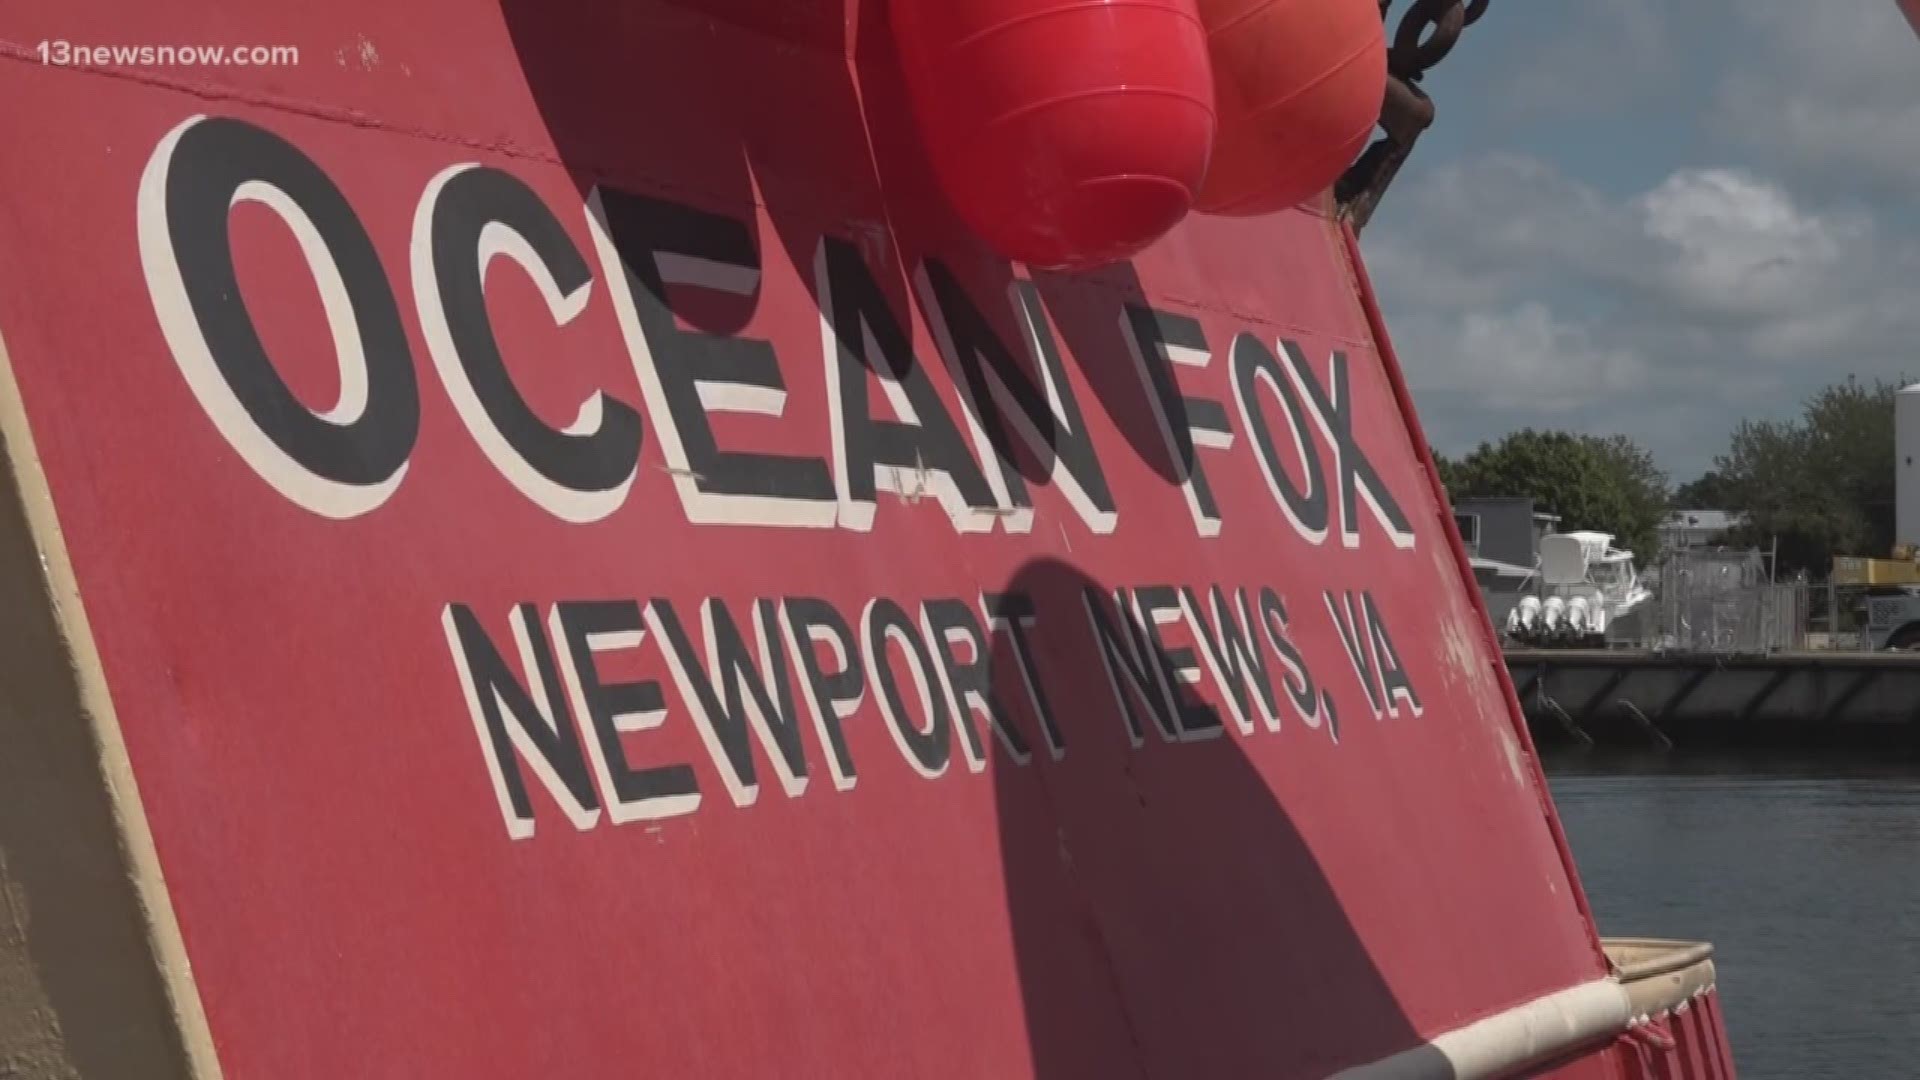 Chesapeake Bay Packing along with other vendors are collecting a boatload of supplies in a 92-foot scallop boat called Ocean Fox. The Ocean Fox will take the supplies to the Abaco Islands.